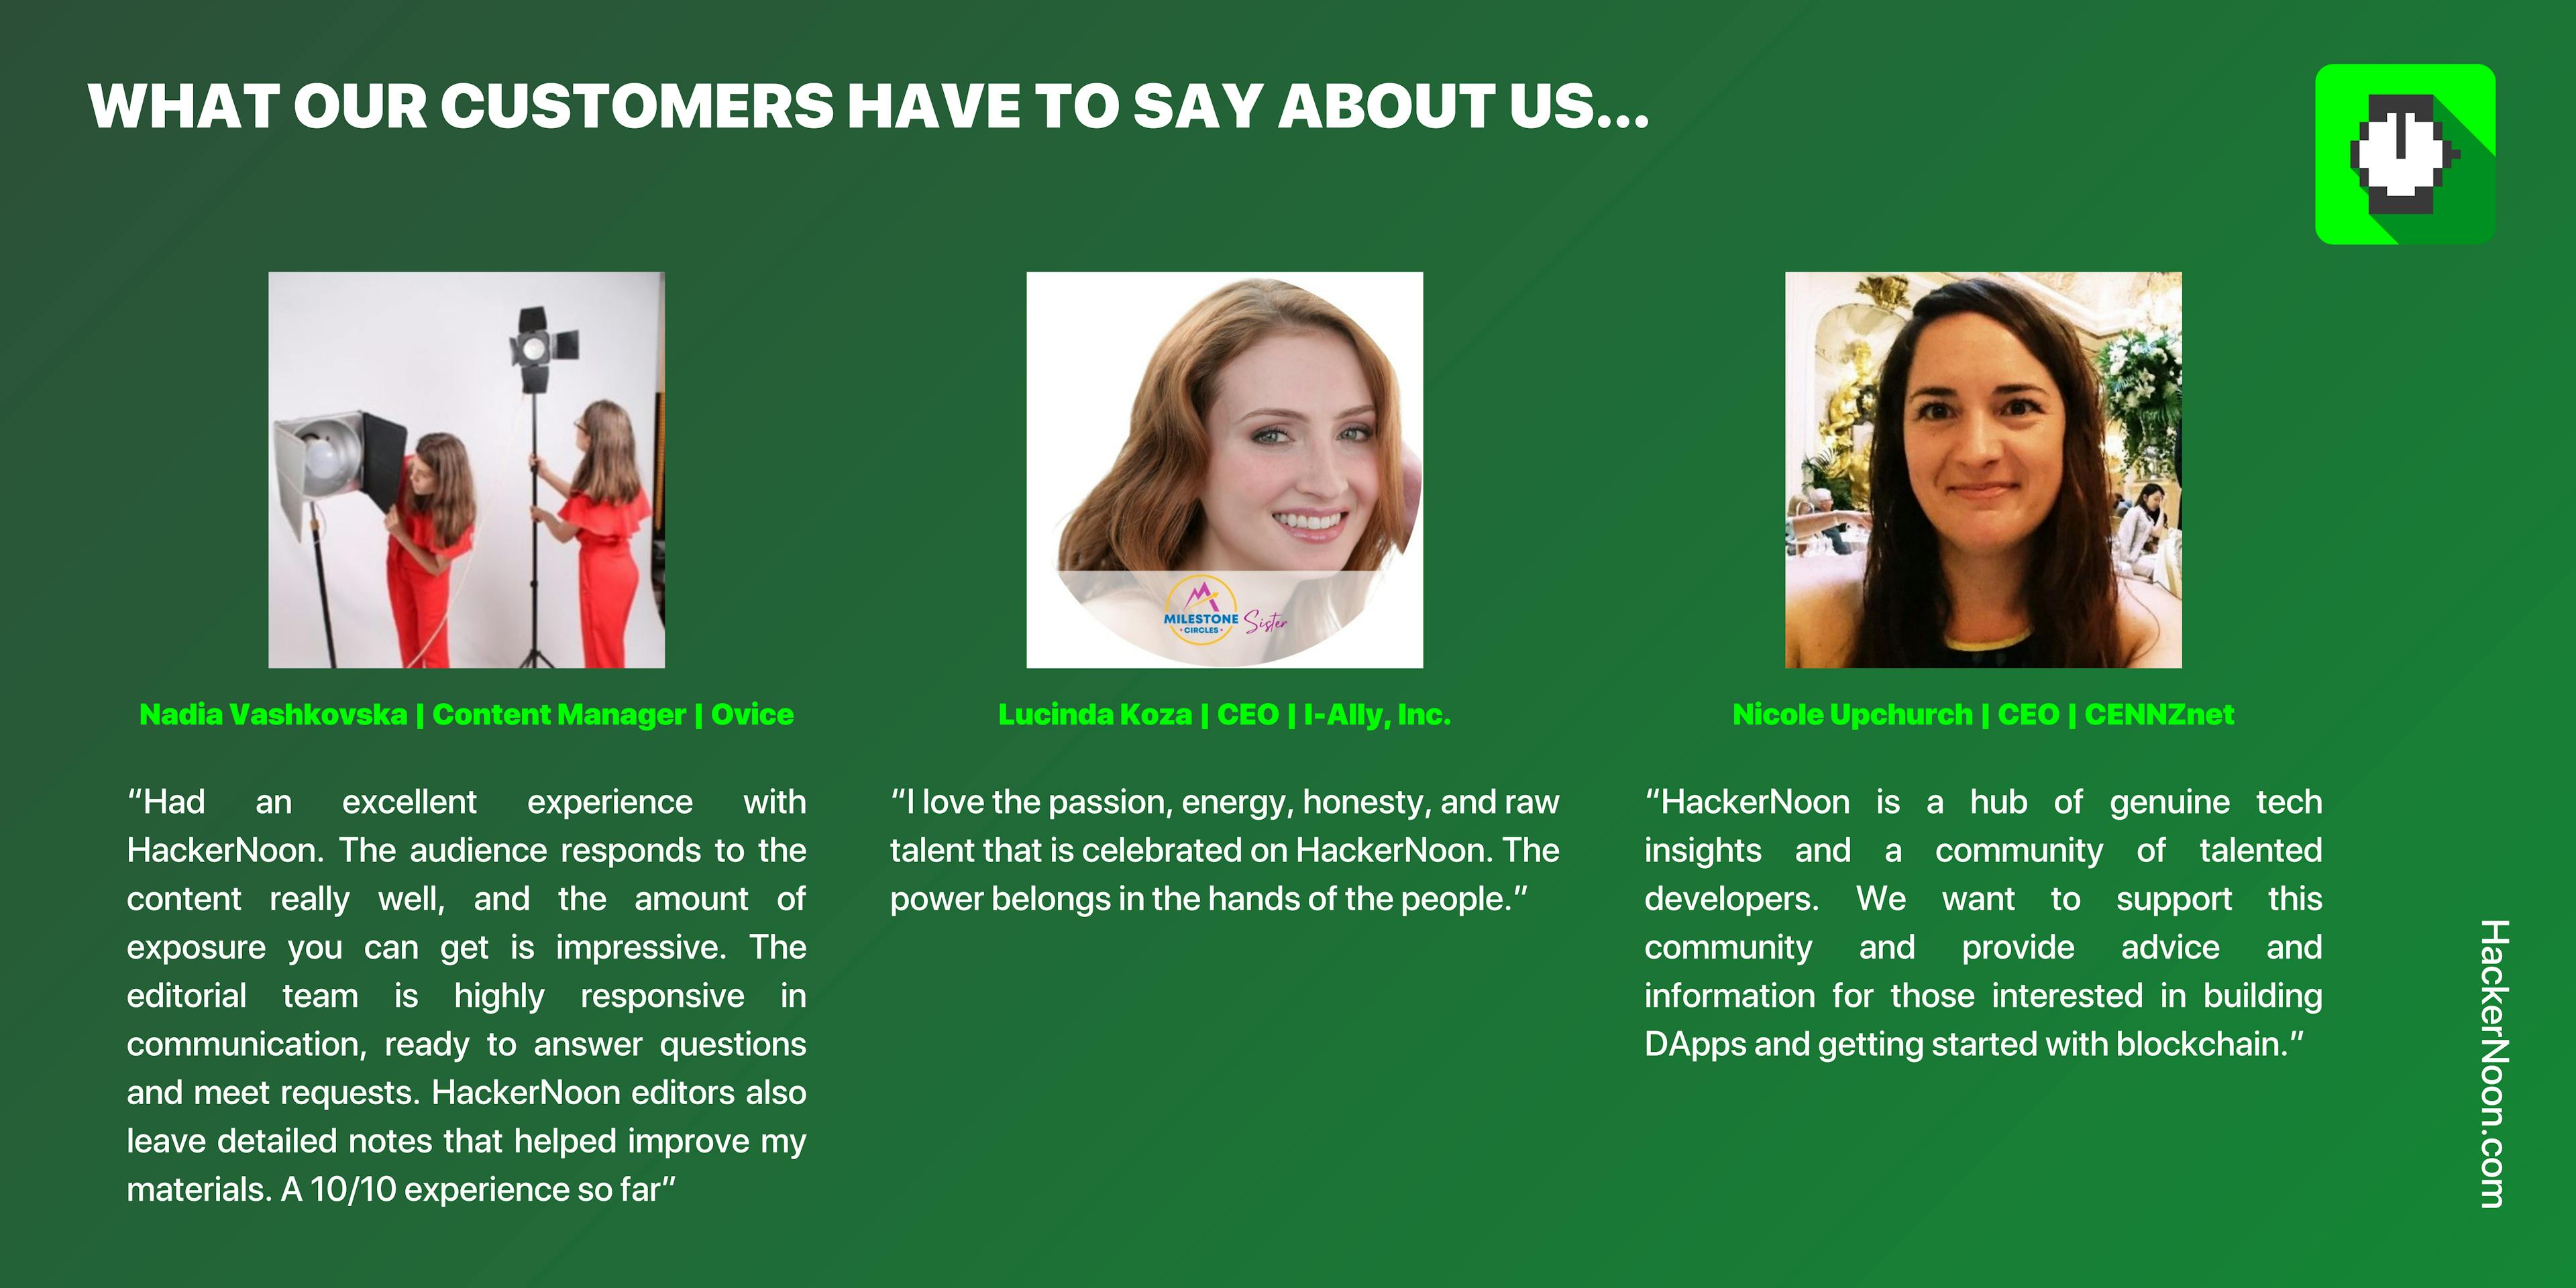 What our customers have to say about HackerNoon